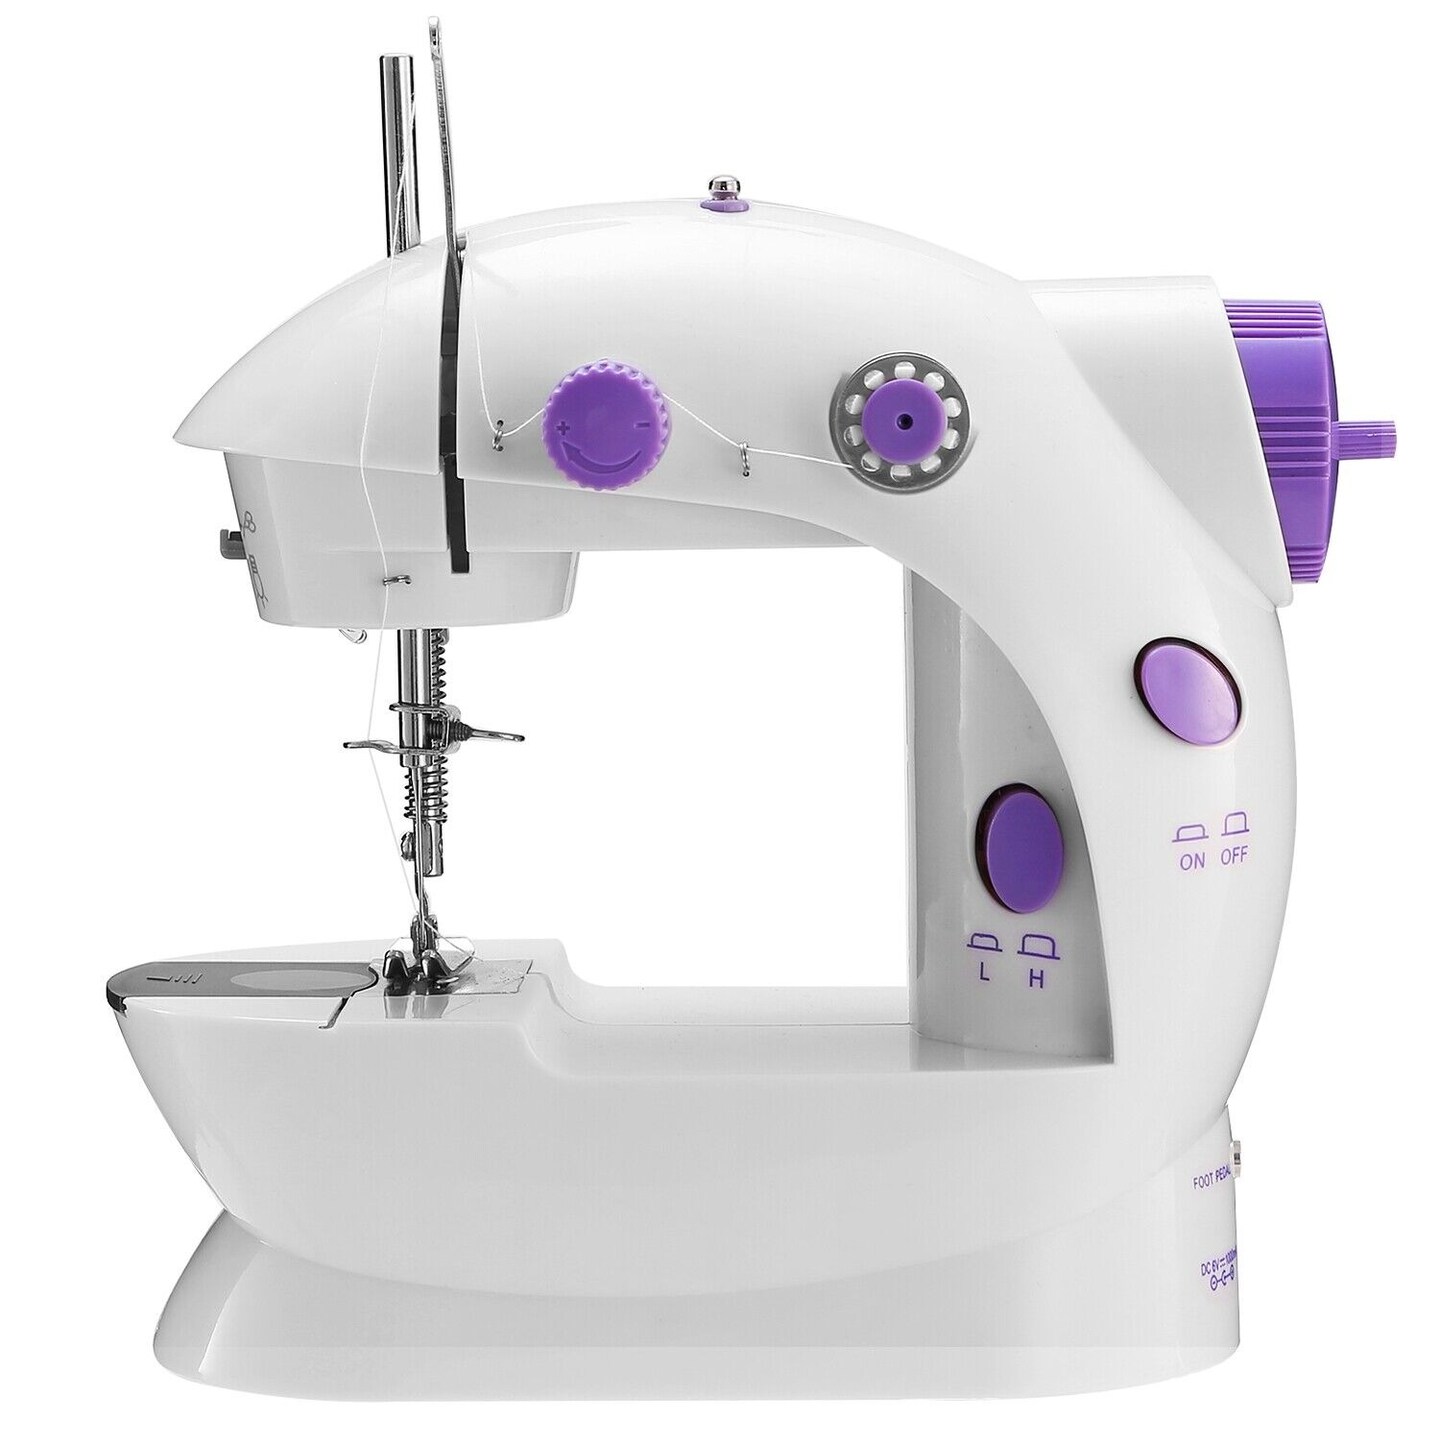 Portable Electric Sewing Machine with LED Light, and Foot Pedal for Home Crafting